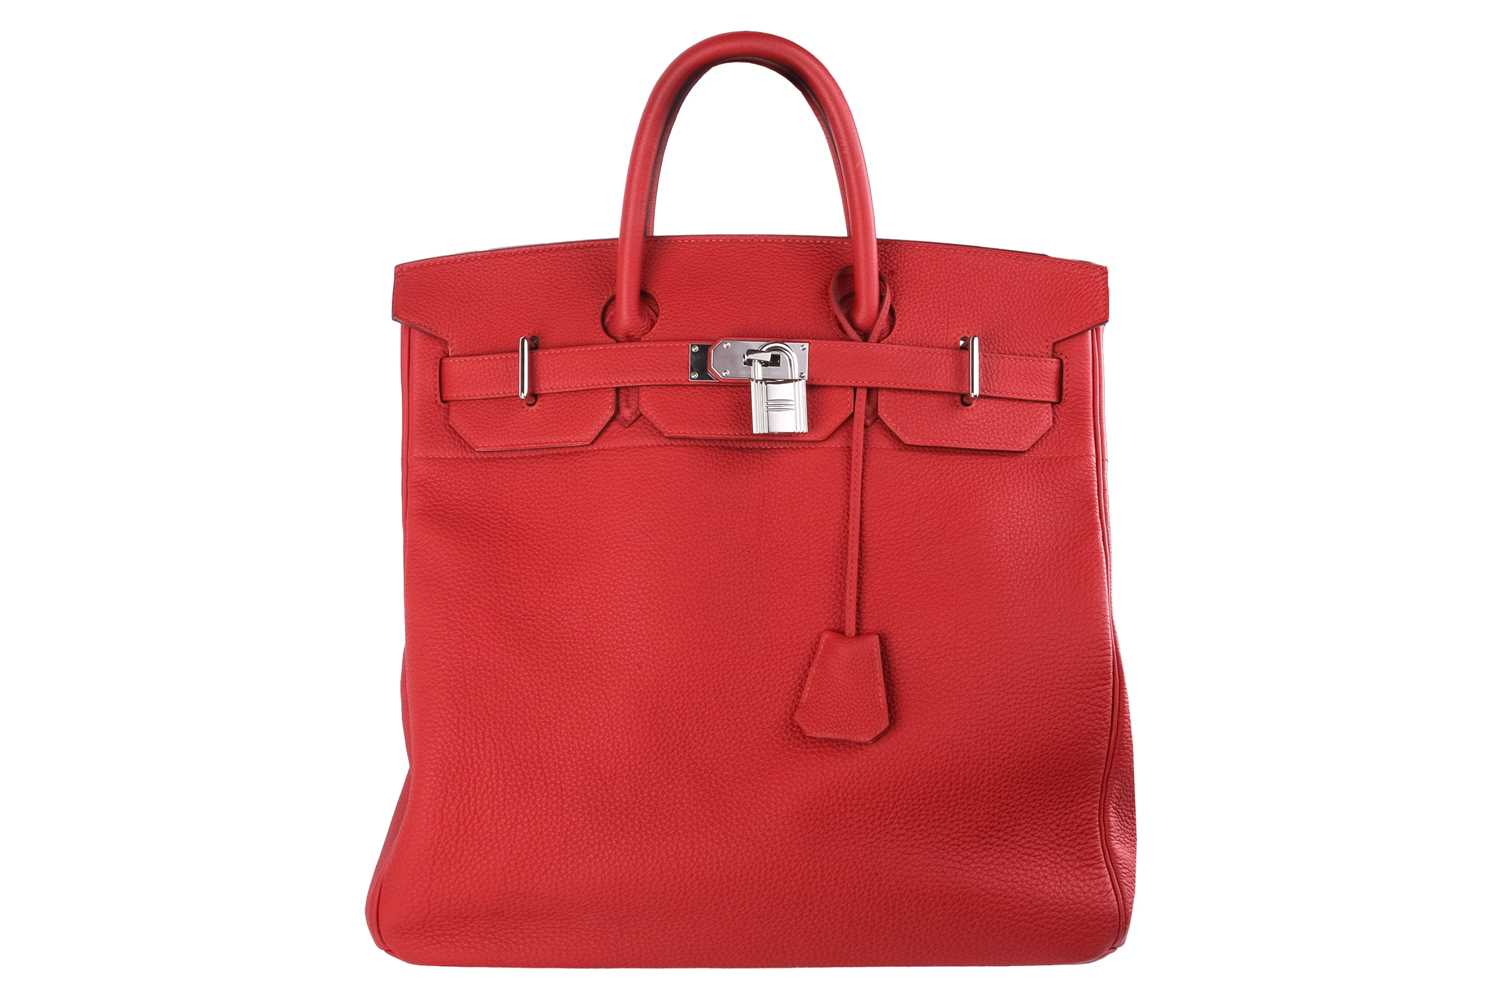 Hermès - a 'Haut à Courroies' HAC Birkin 40 in Capucine Togo leather, 2015, leather-lined body with 